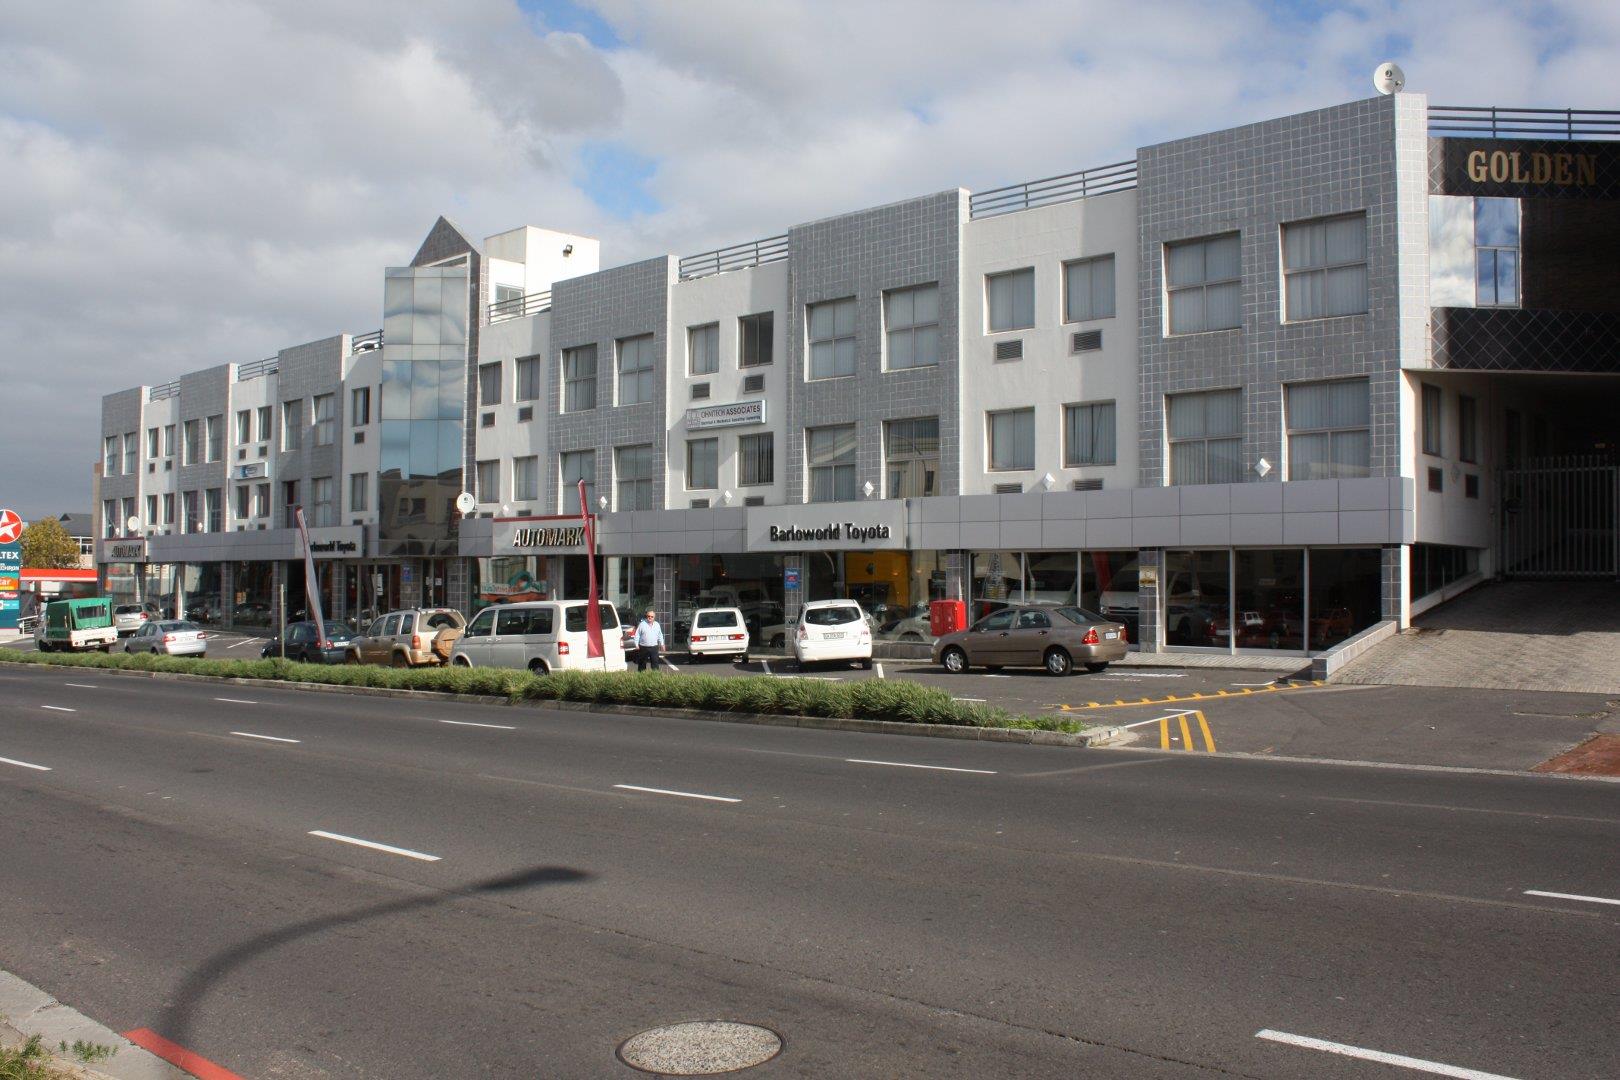 Commercial property to rent in Bellville Central - Golden Mile Building, 265 Durban Road